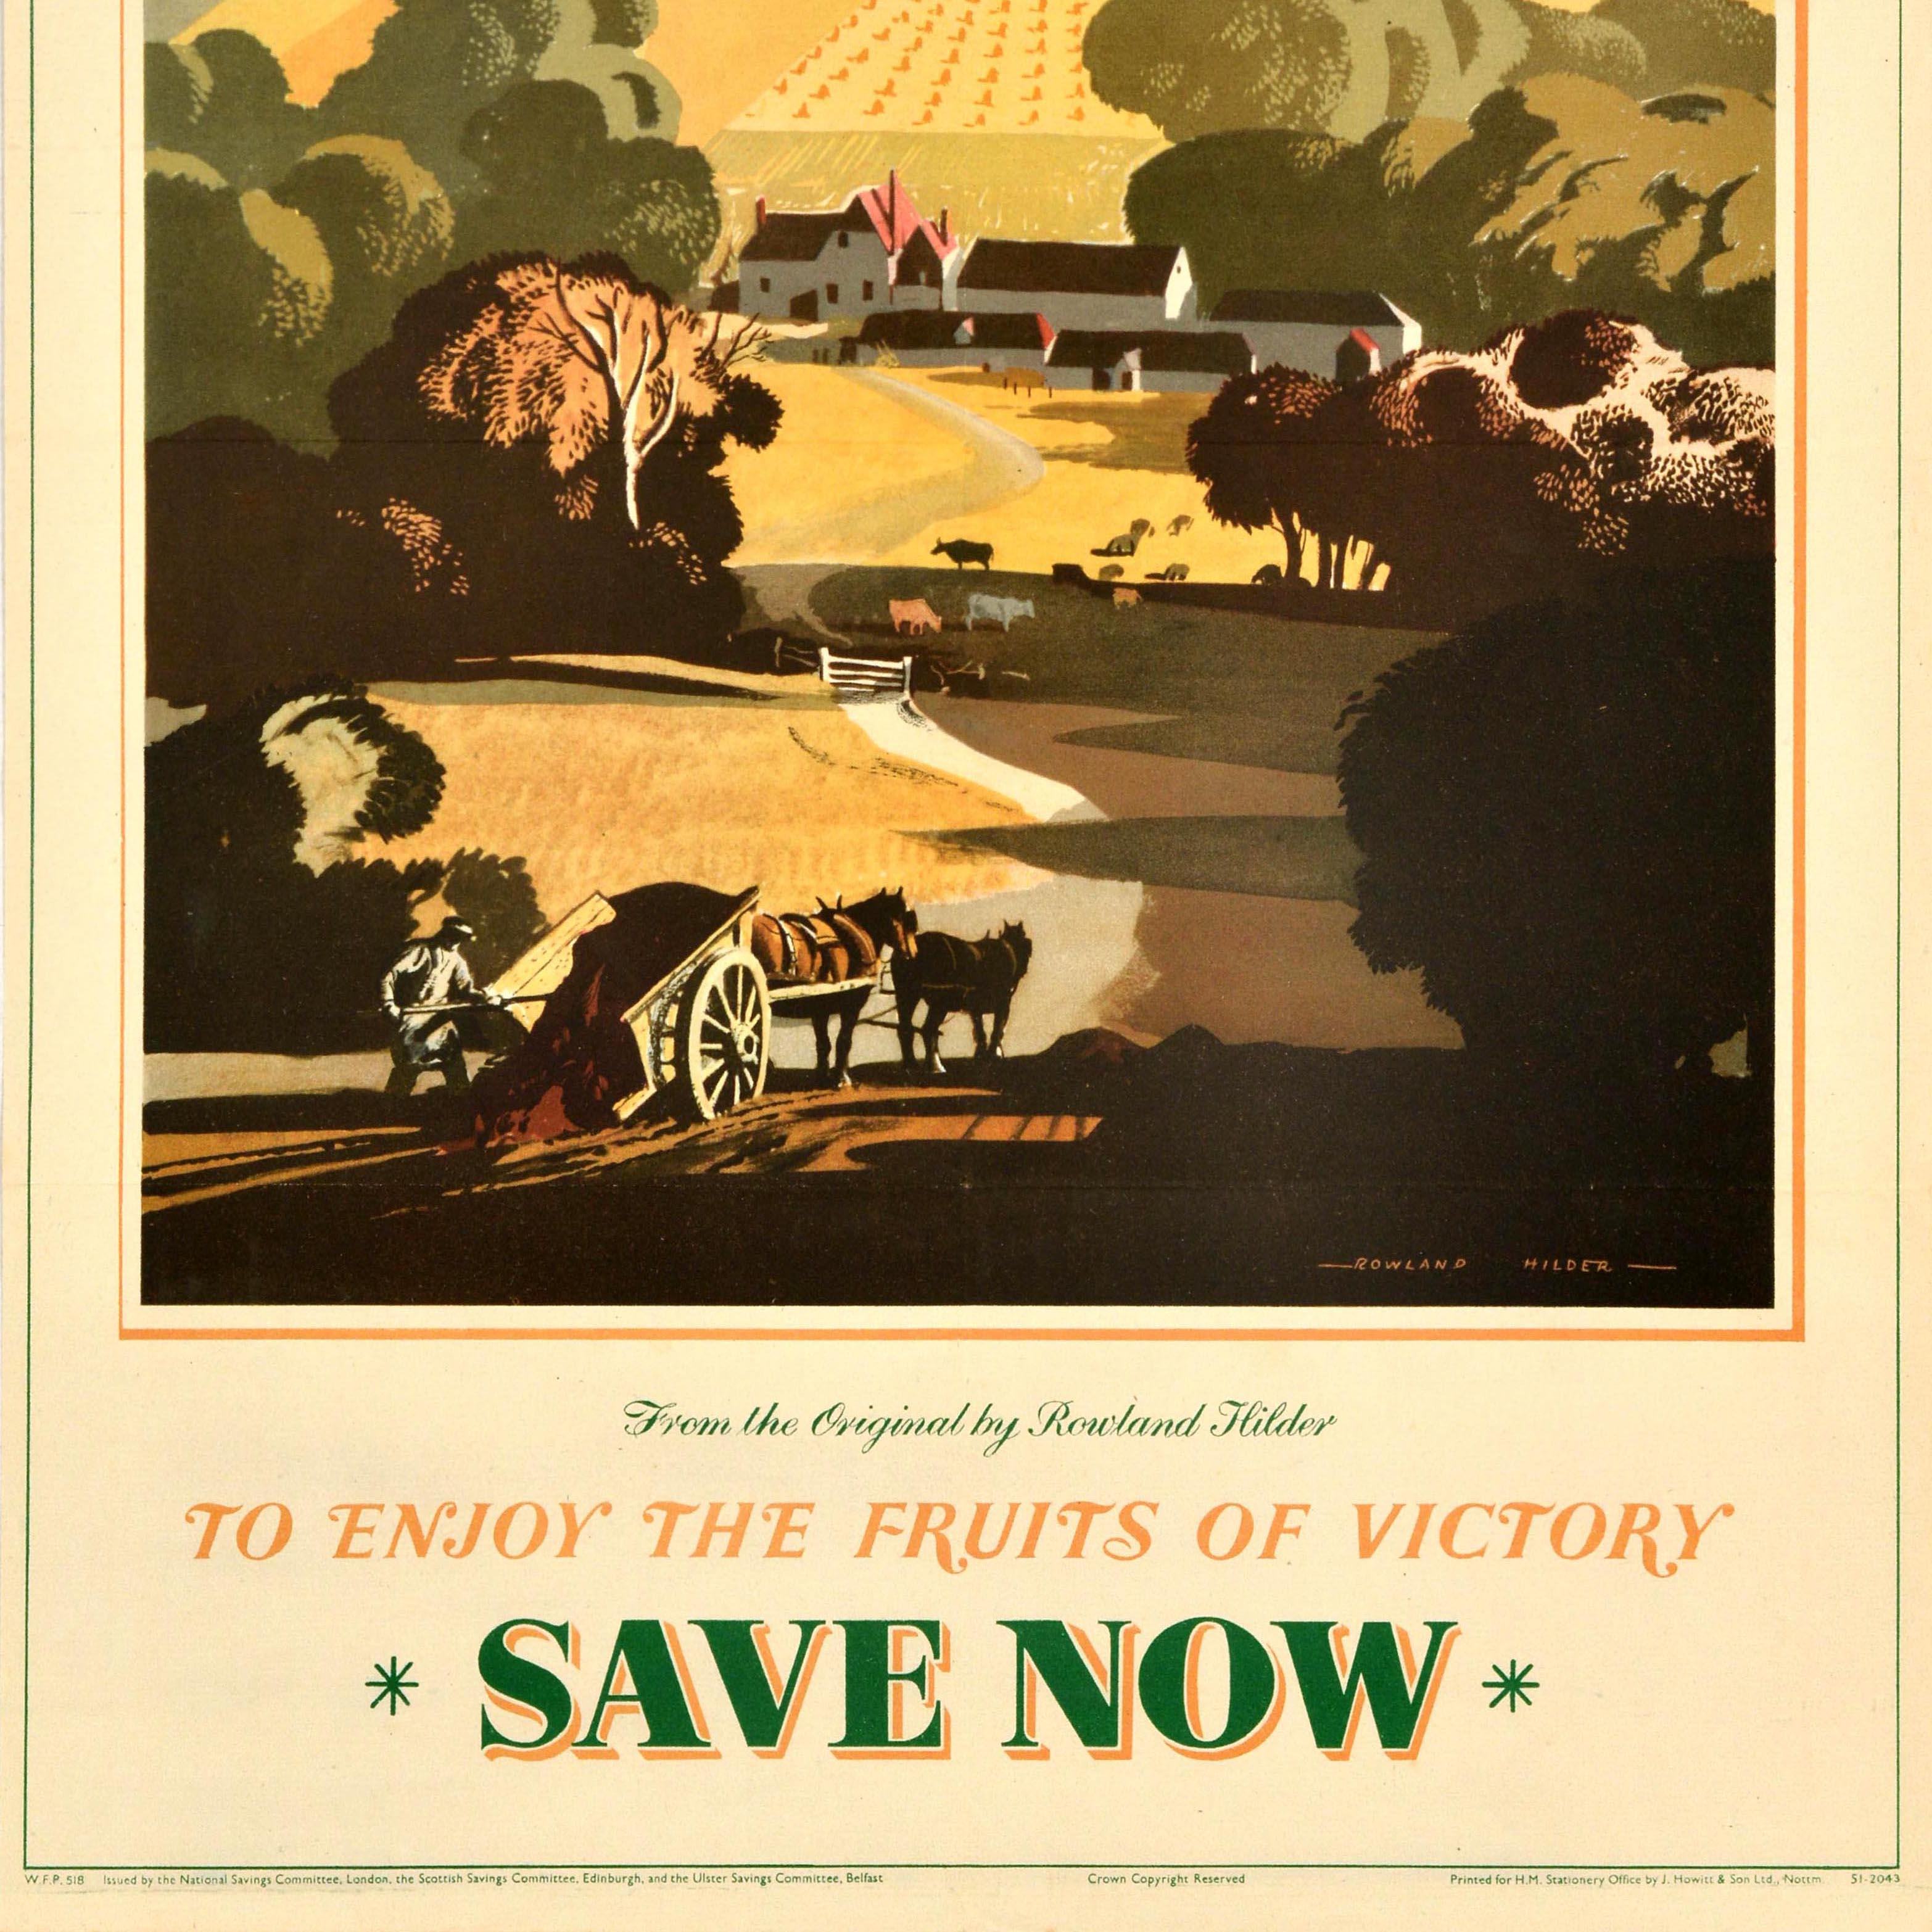 Original vintage World War Two poster - To Enjoy the Fruits of Victory Save Now - featuring a countryside illustration From the original by Rowland Hilder (1905-1993) depicting a rural landscape with a farmer and a horse draw cart in the foreground,